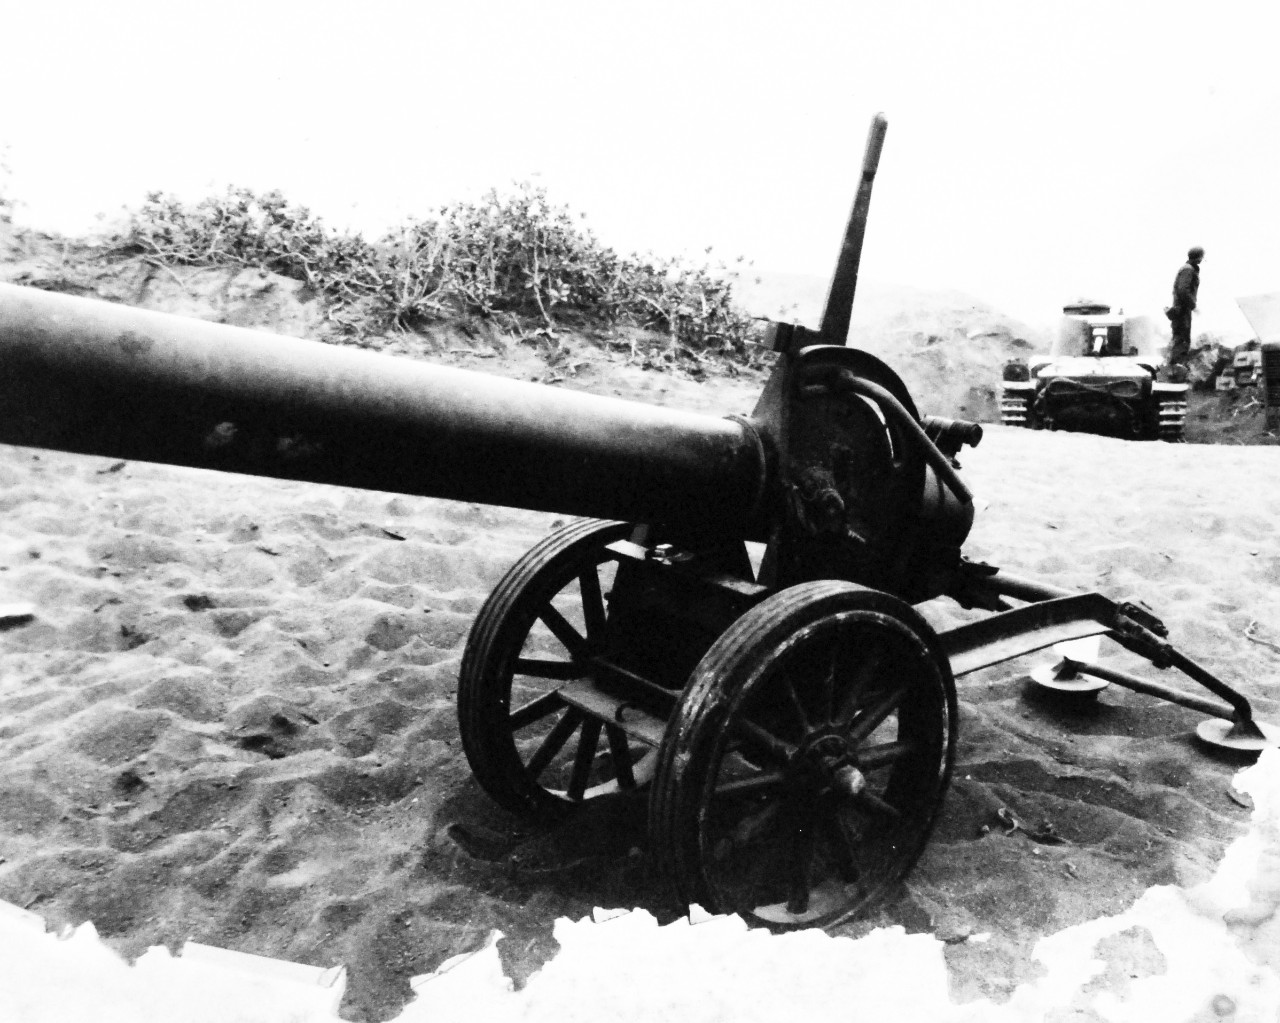 127-GW-304-142254:  Battle for Iwo Jima, February-March 1945.   Side view of Japanese 20cm mobile rocket launcher.  Note the crude elevating mechanism.  (Breech loading).  Photographed by Pfc C.L. Purser, 1945. Official U.S. Marine Corps photograph, now in the collections of the National Archives.  (2016/02/17).